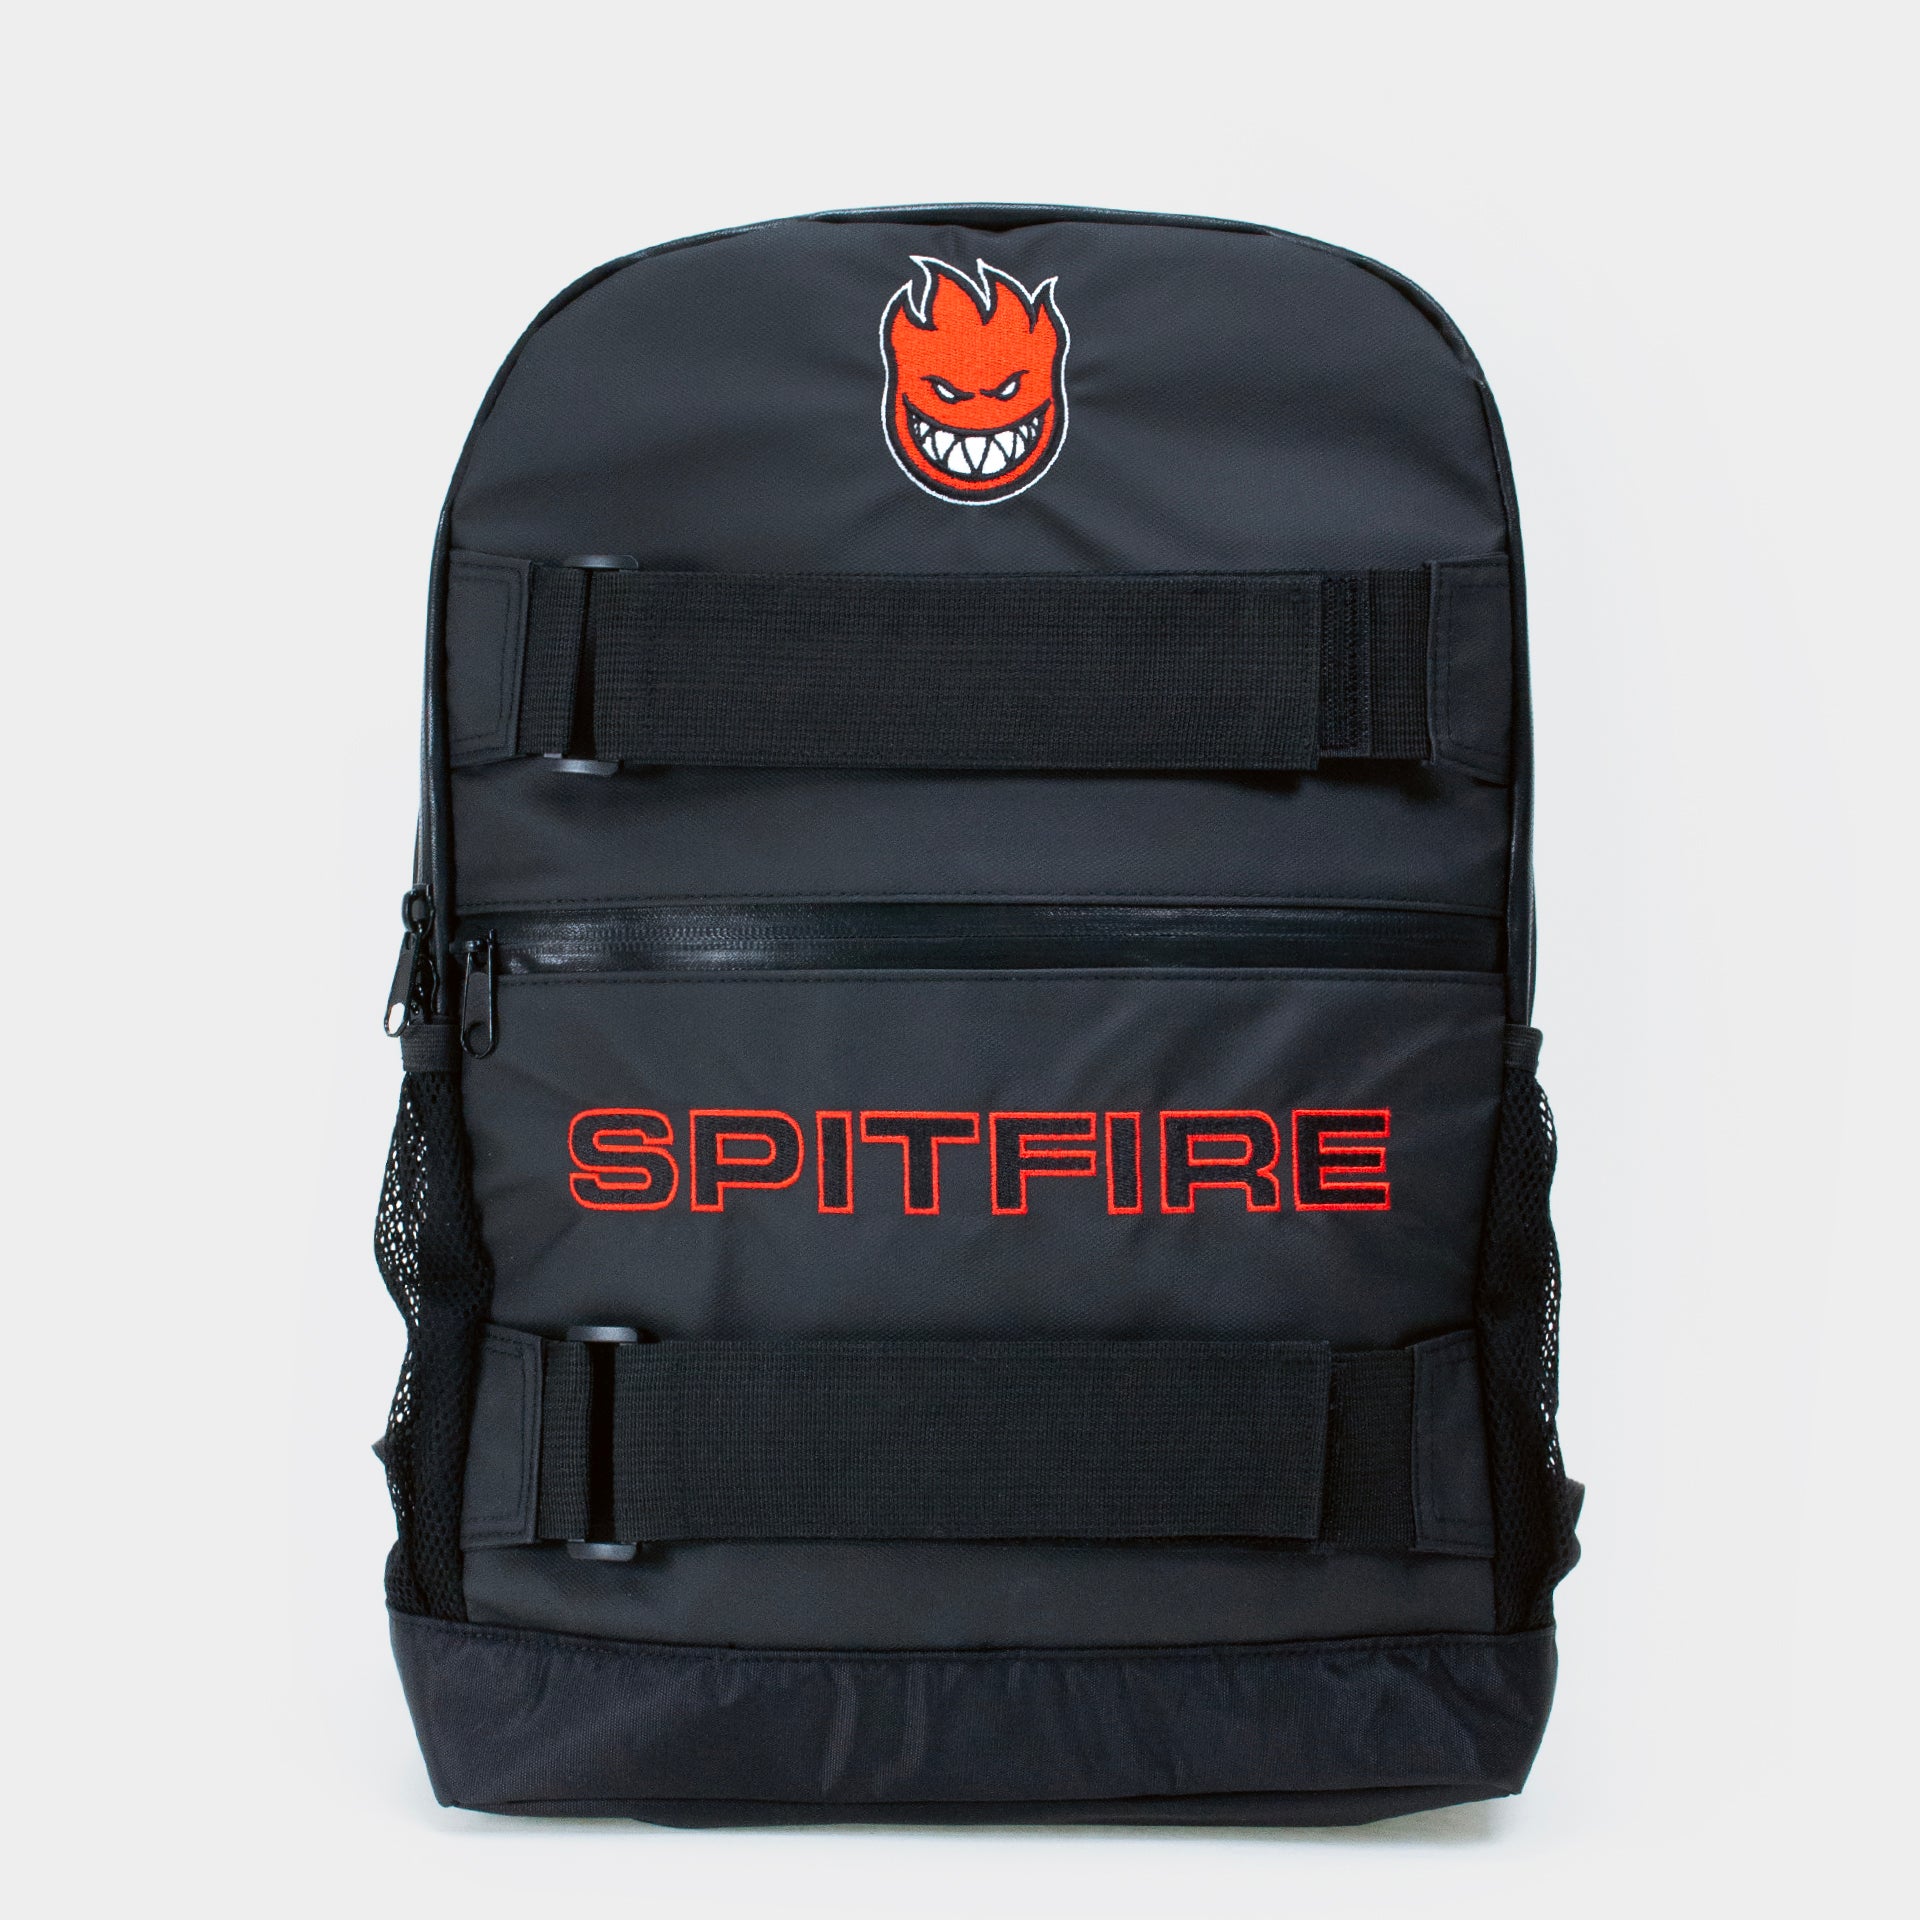 Spitfire Classic '87 Backpack - Black/ Red - Prime Delux Store